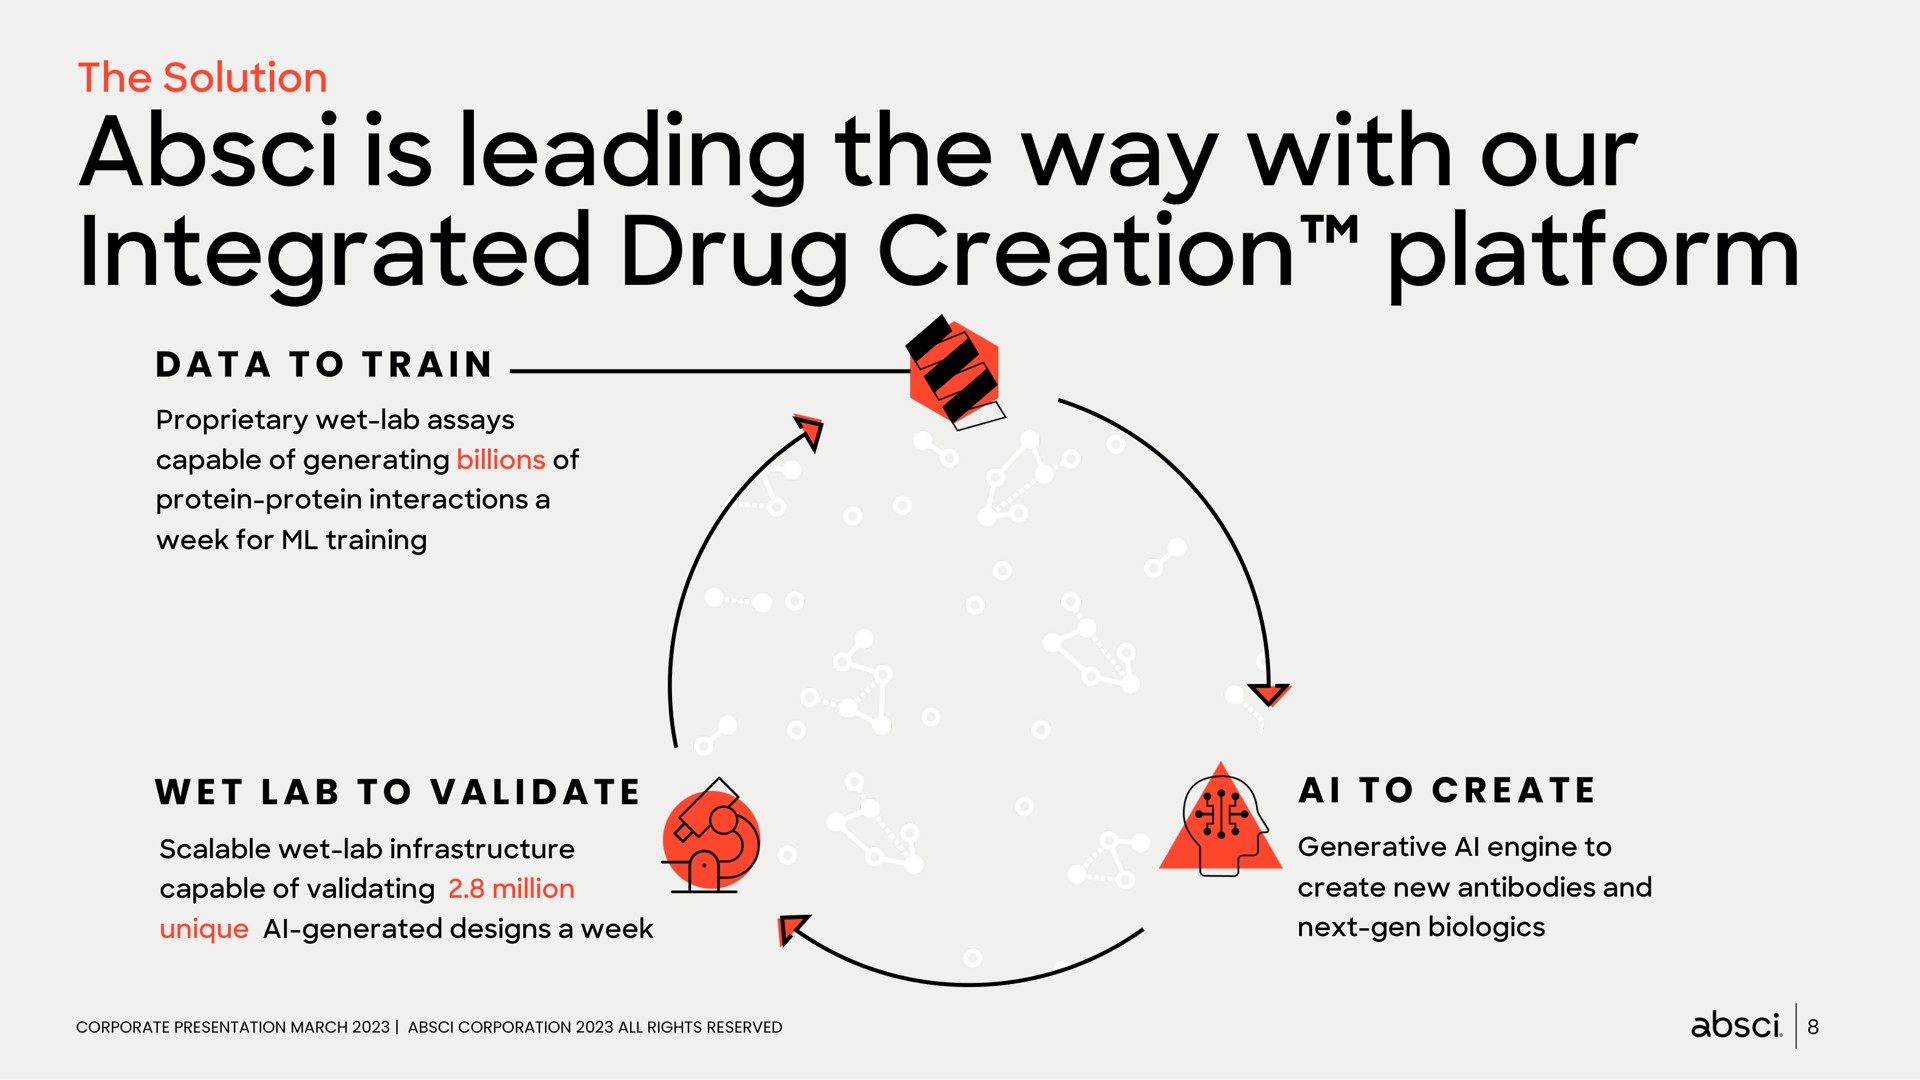 is leading the way with our integrated drug creation platform | Absci